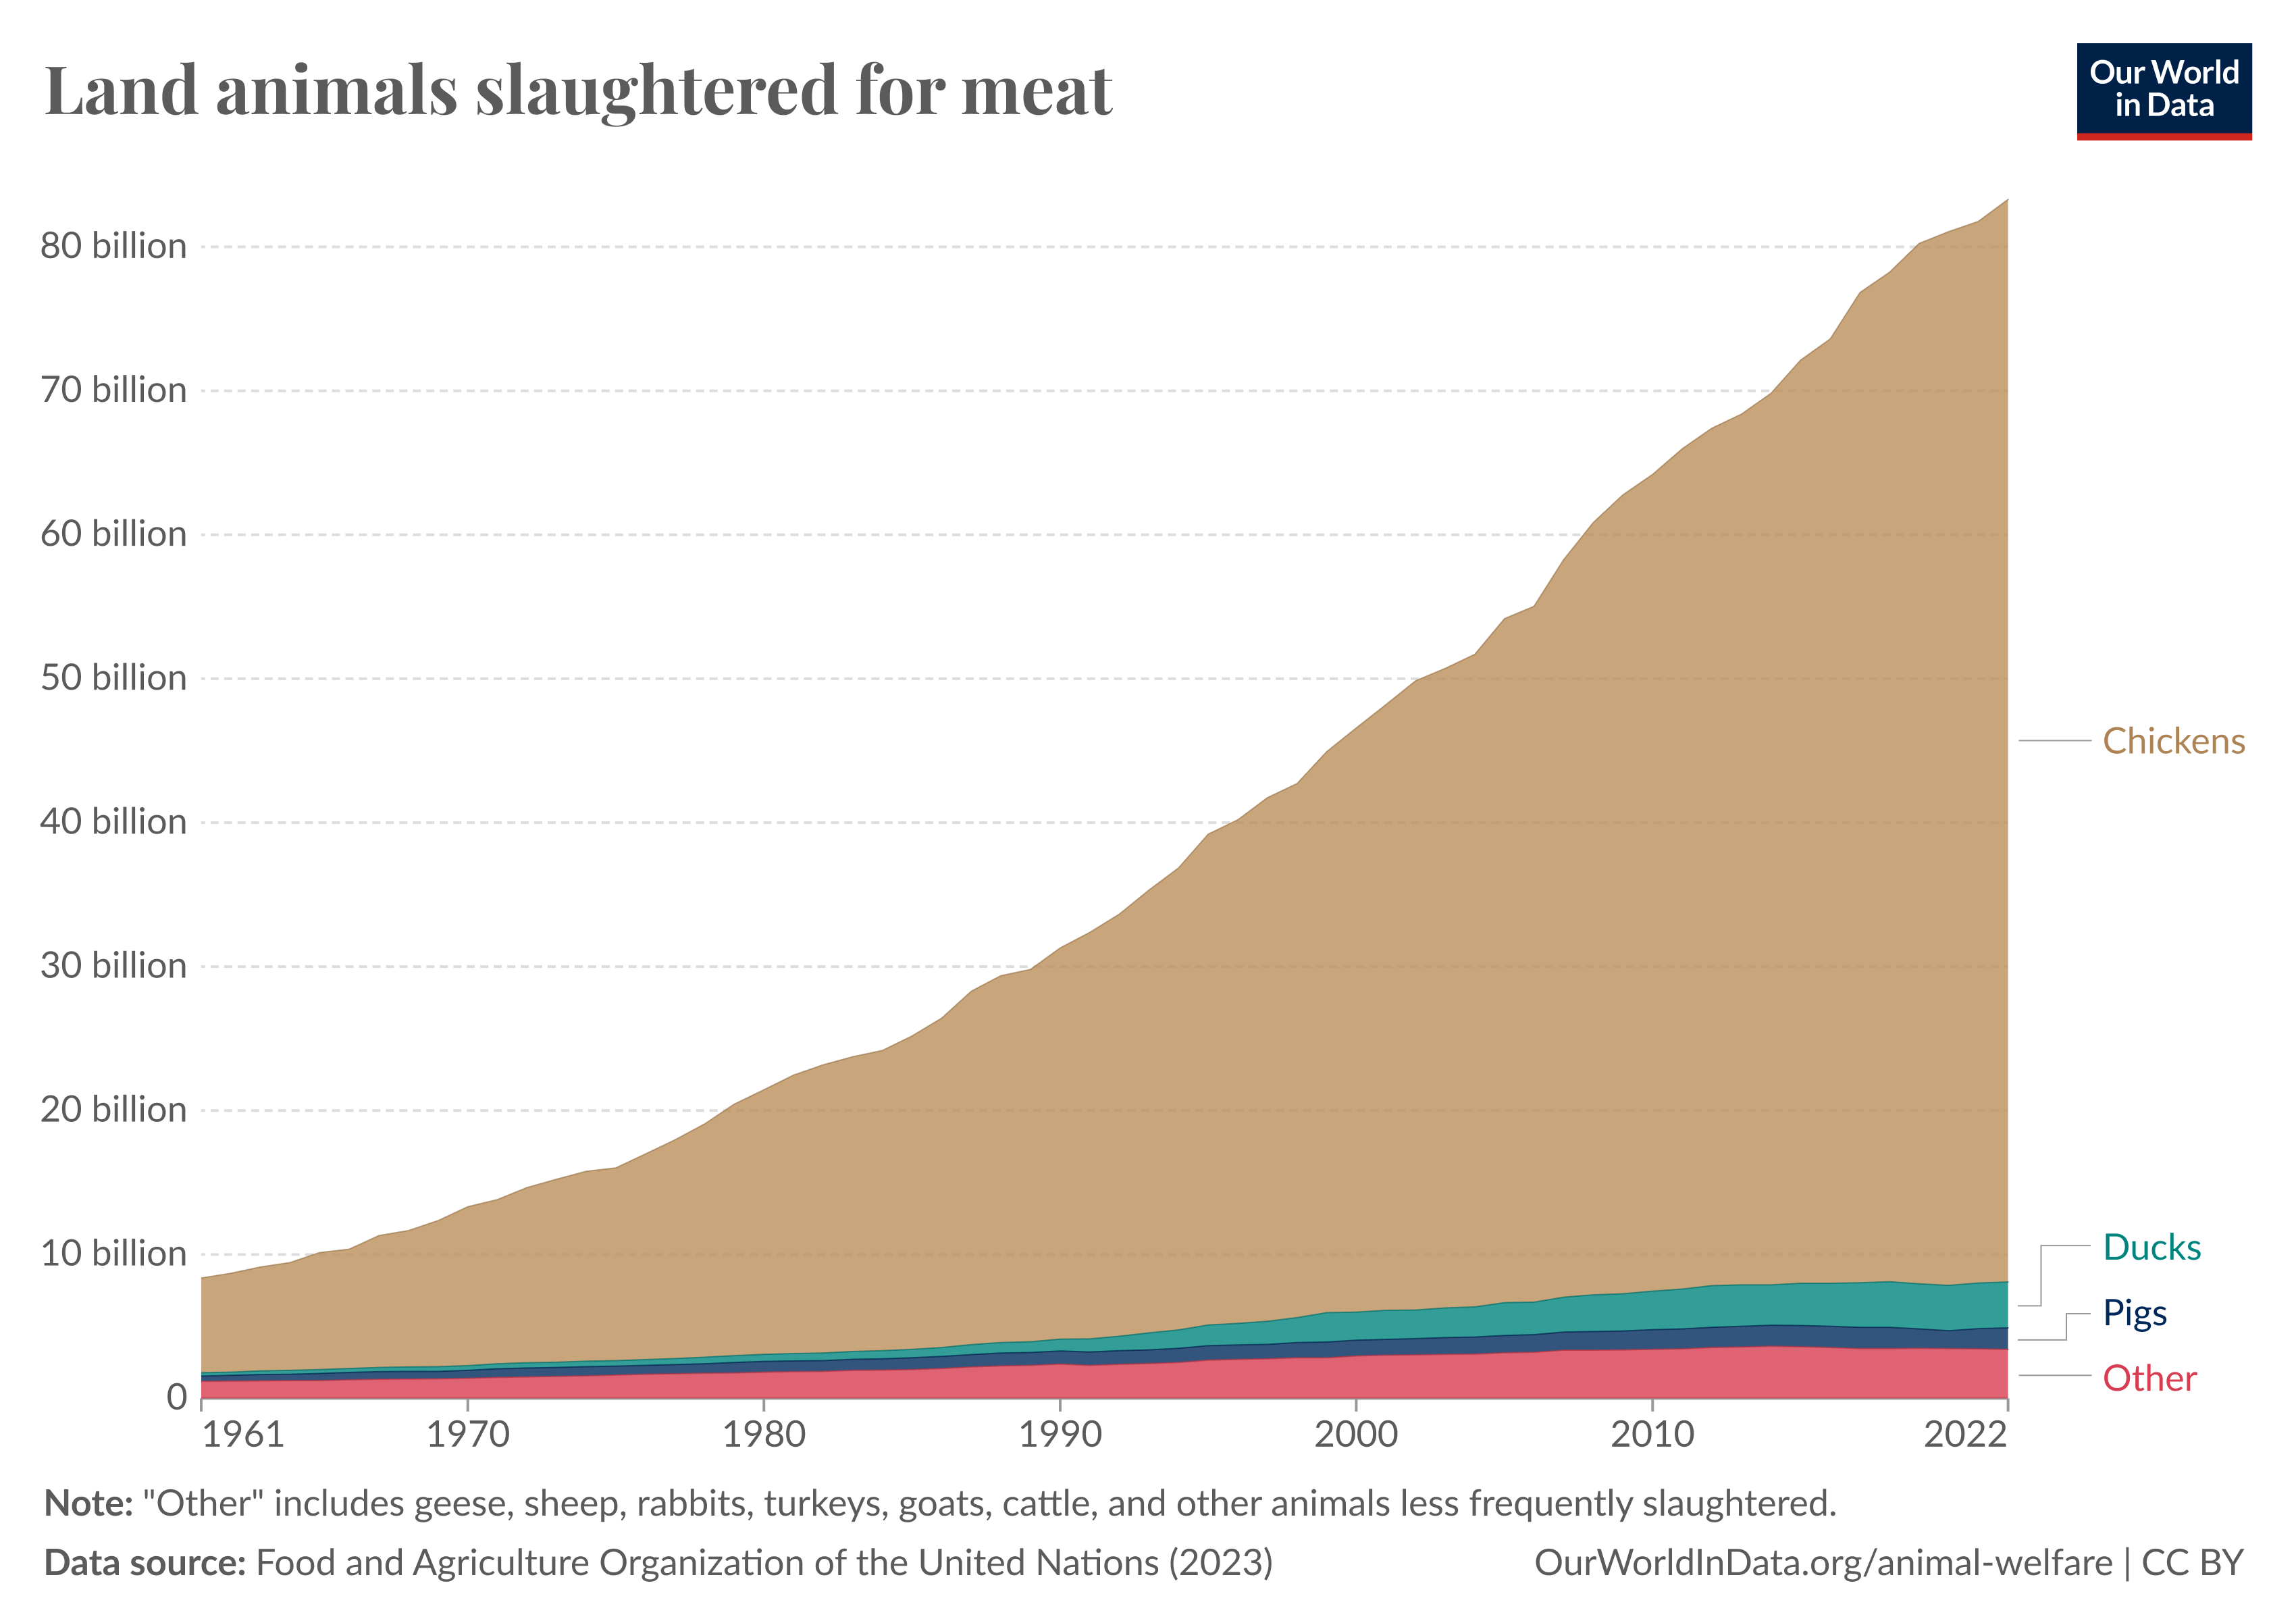 Stacked area chart showing the yearly number of land animals slaughtered for meat worldwide, from 1961 until 2022. The most common are chickens, ducks and pigs.